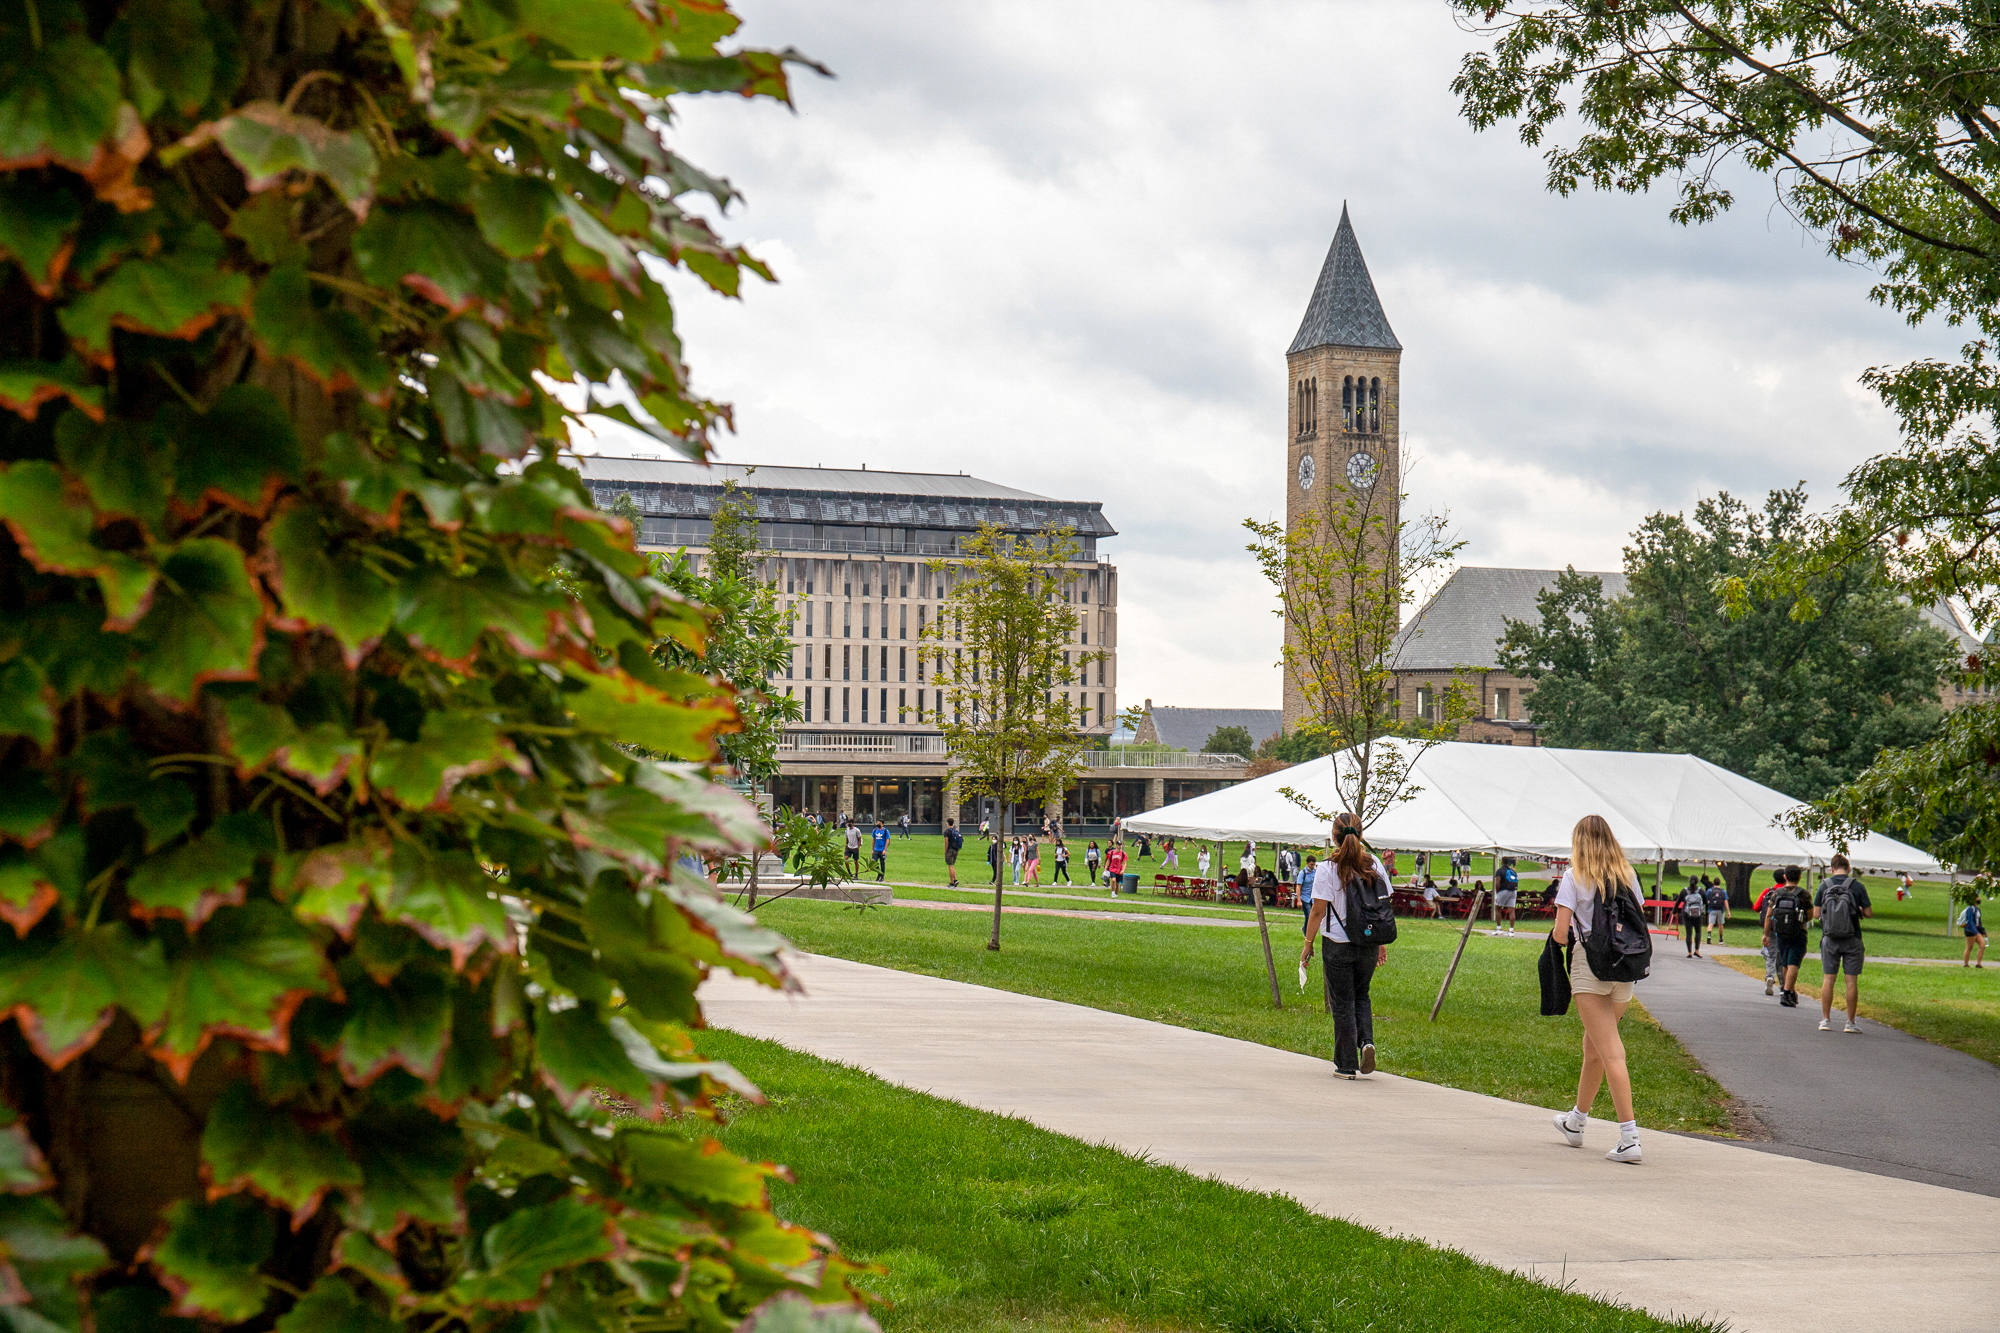 Cornell University Fall 2022 Calendar U.s. News And World Report Places Cornell 17Th In 2022 Annual Rankings |  The Cornell Daily Sun